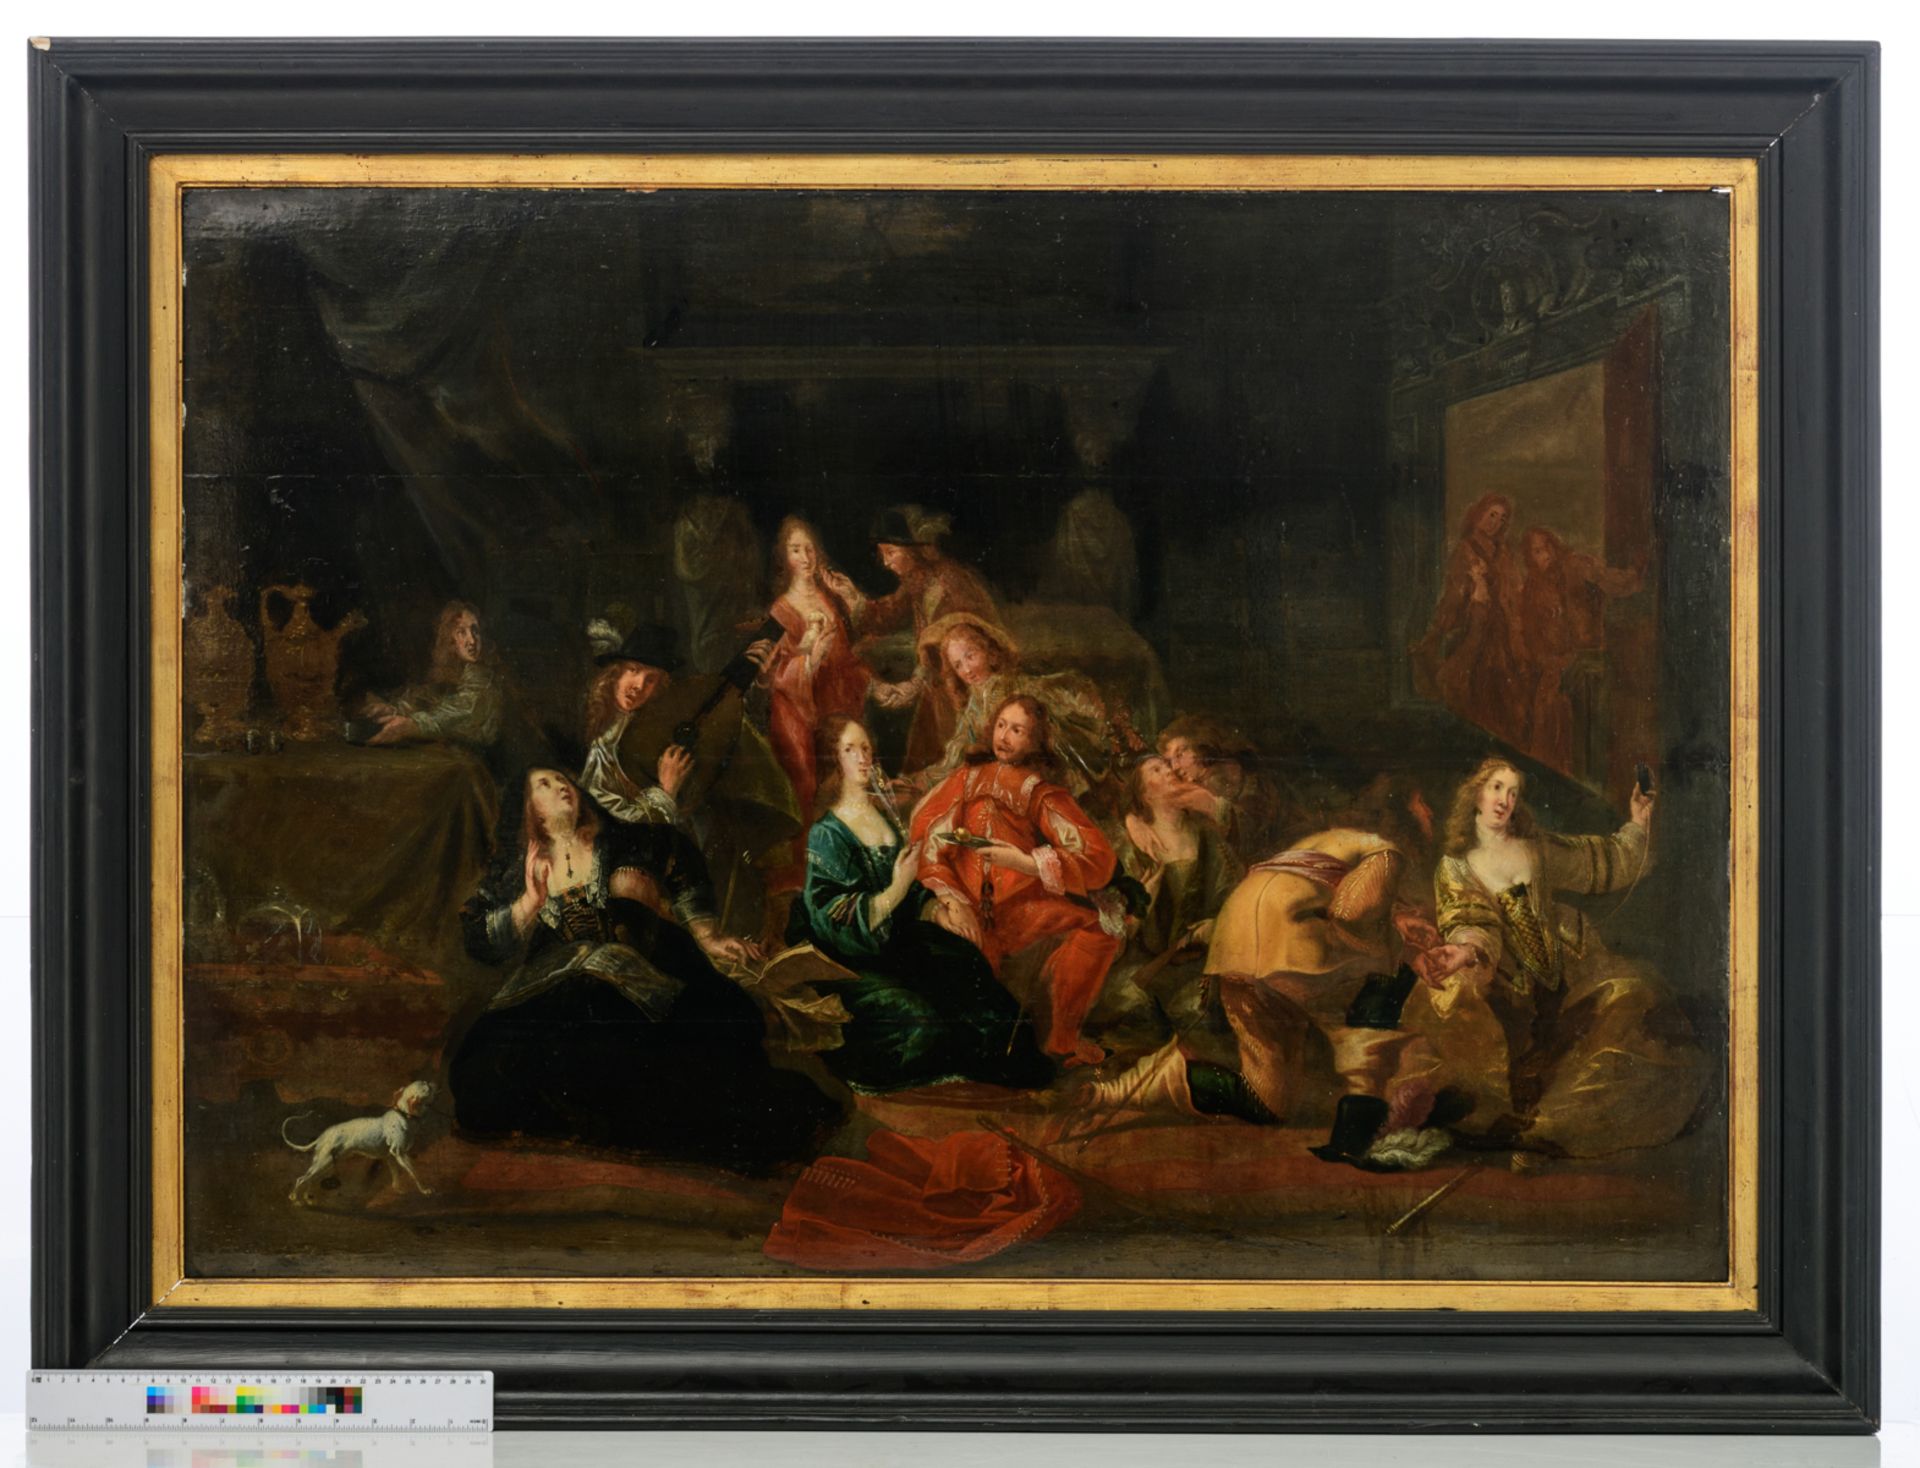 No visible signature, the wedding party, 17thC, oil on panel, 74 x 105 cm - Image 4 of 4